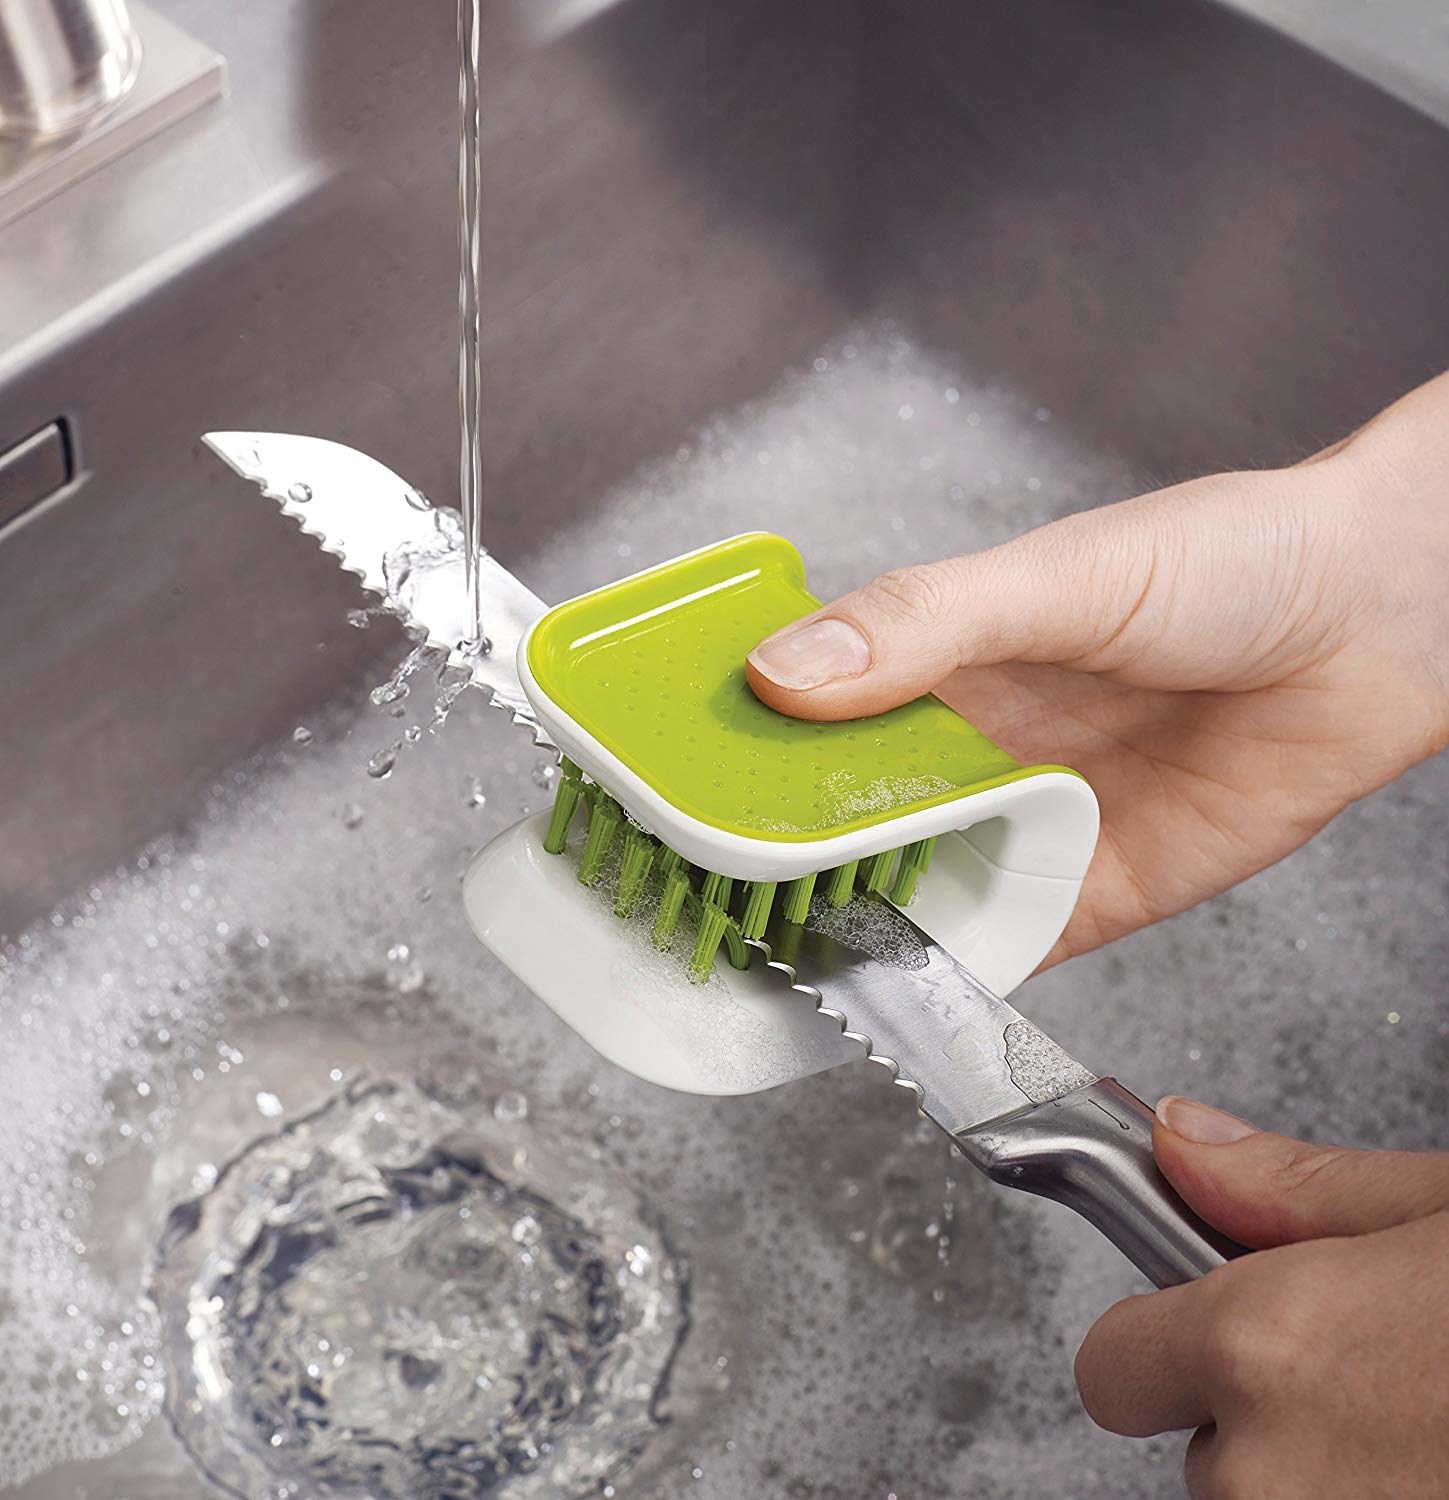 Dish washing products: 17 gadgets to improve your least favorite